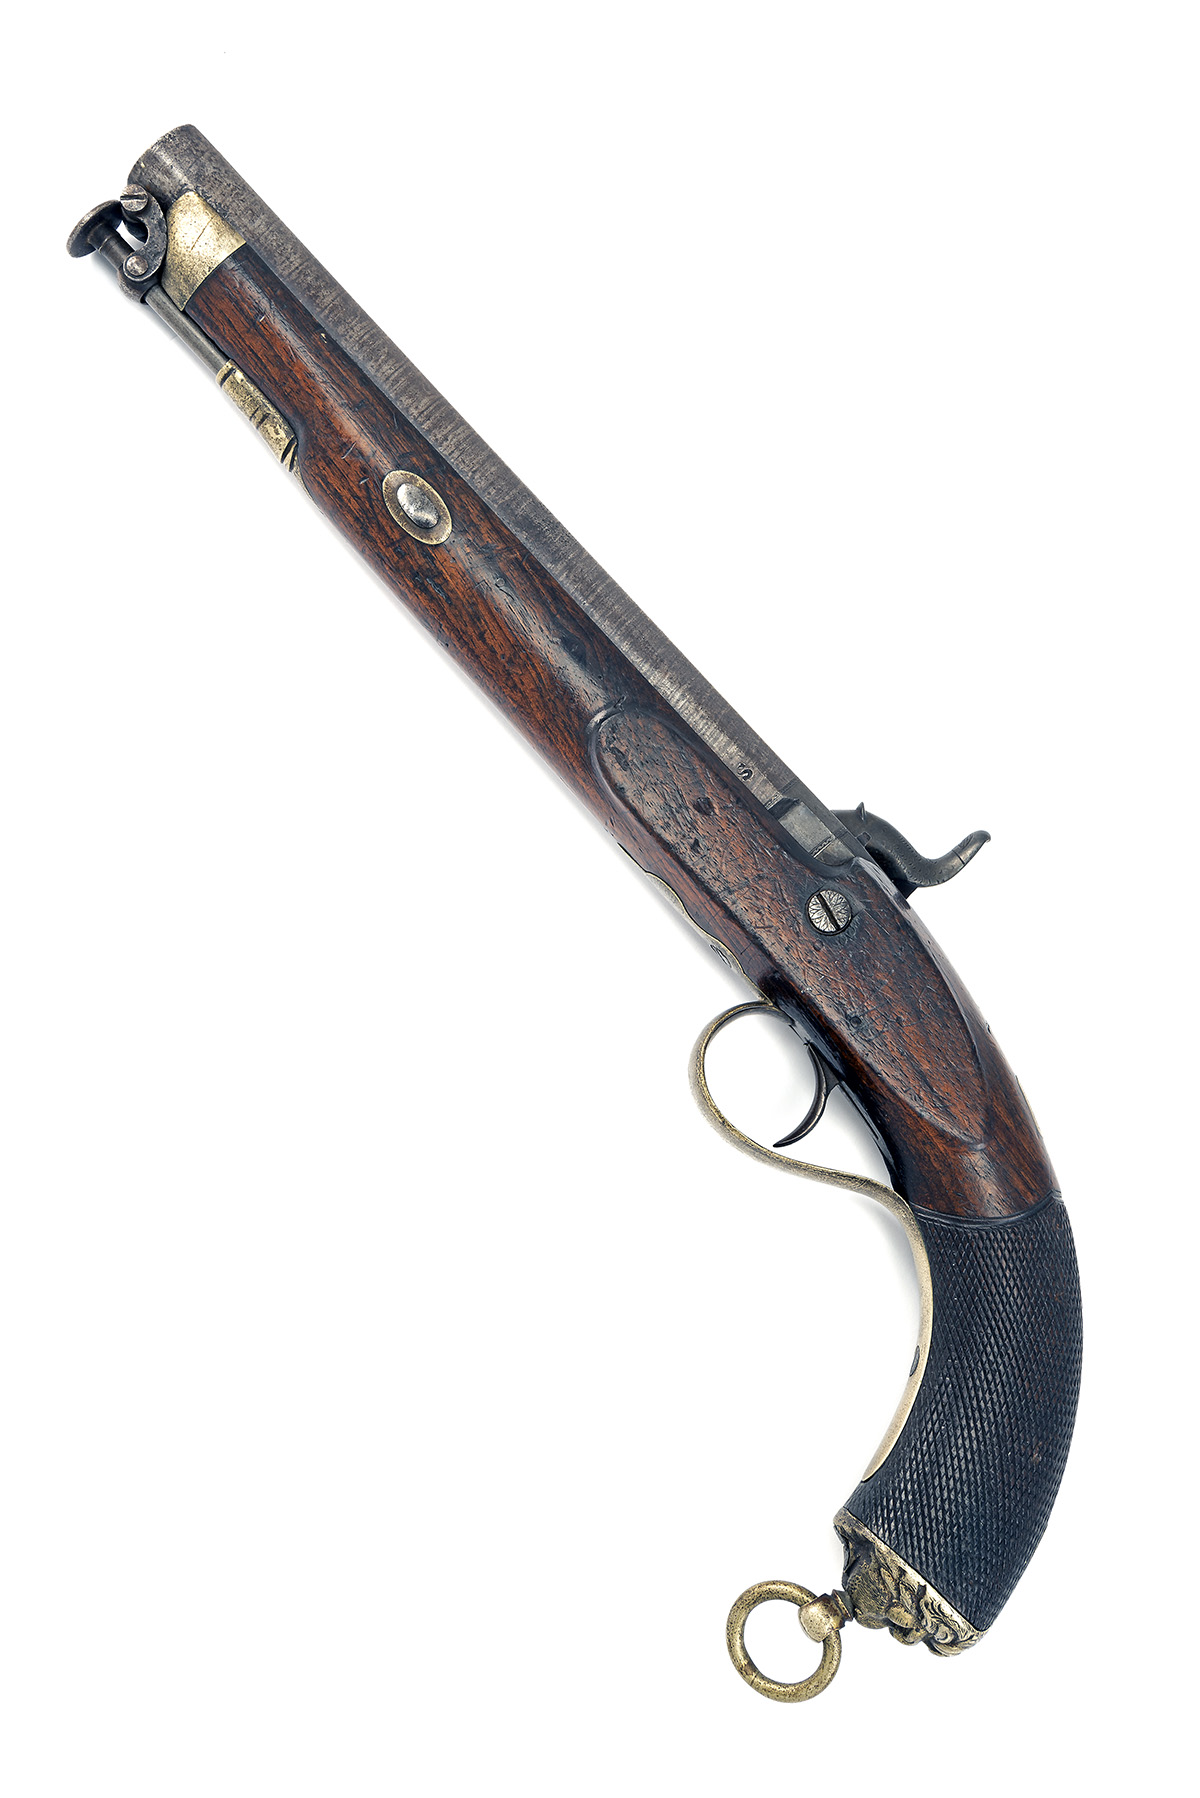 A RARE .65 NATIVE OFFICER'S PERCUSSION PISTOL OF THE POONAH IRREGULAR HORSE BY GARDEN & SON, CIRCA - Image 2 of 4